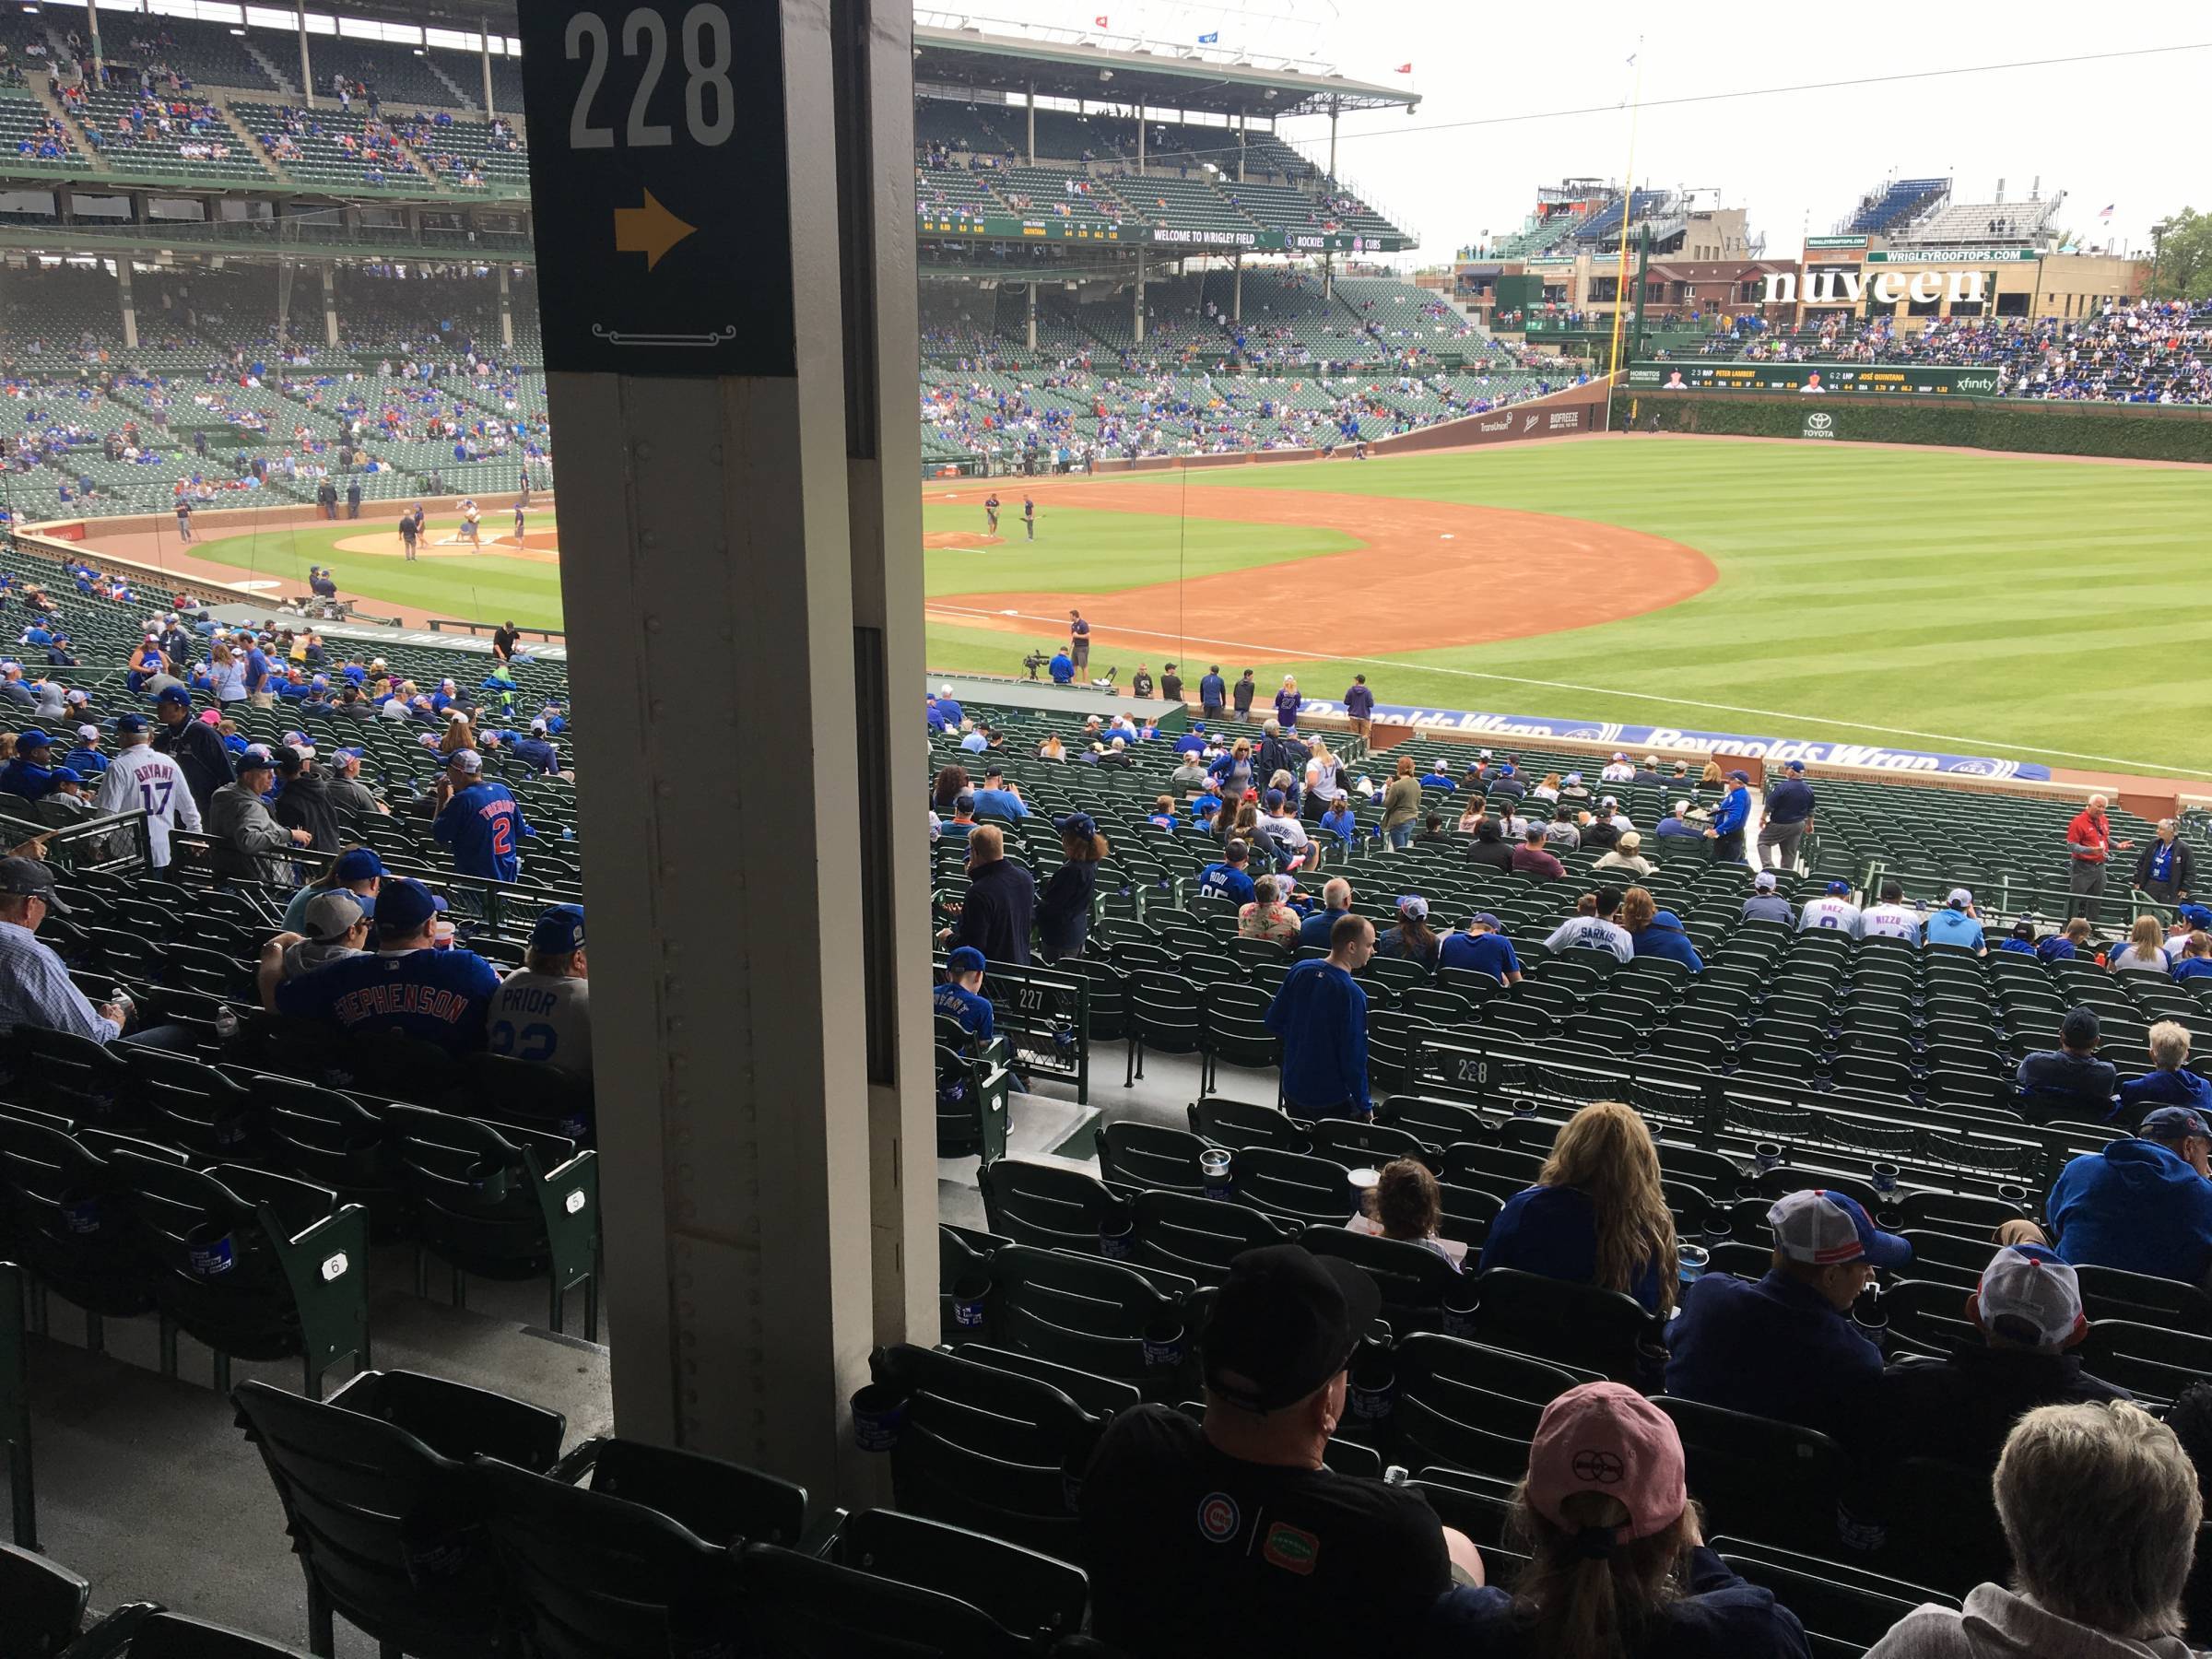 Pole in Section 228 at Wrigley Field